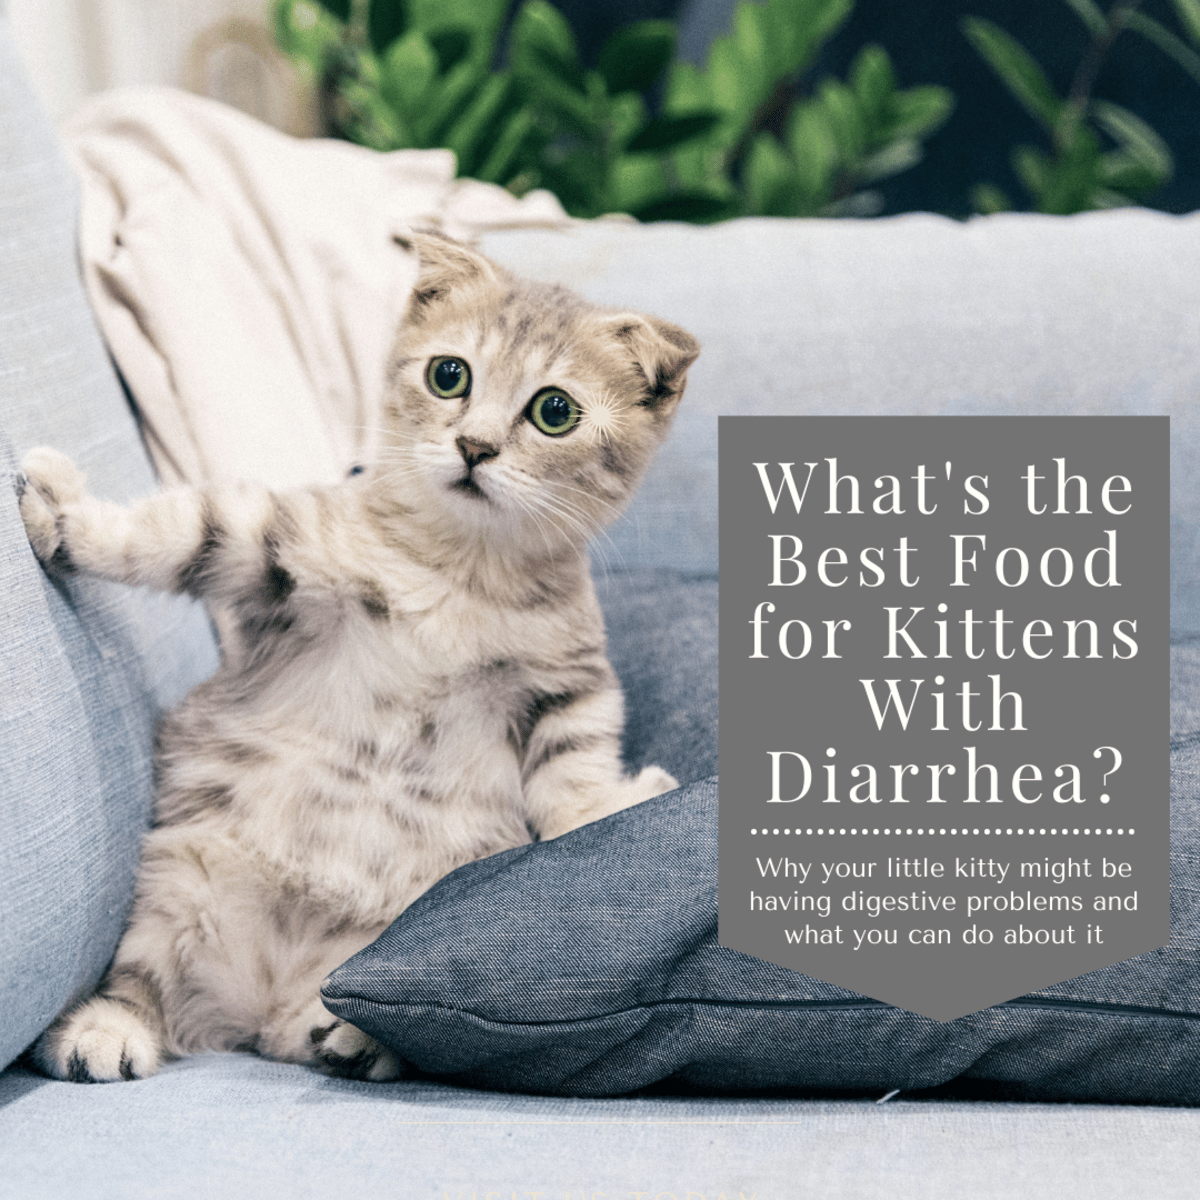 What Is the Best Kitten Food for Diarrhea?